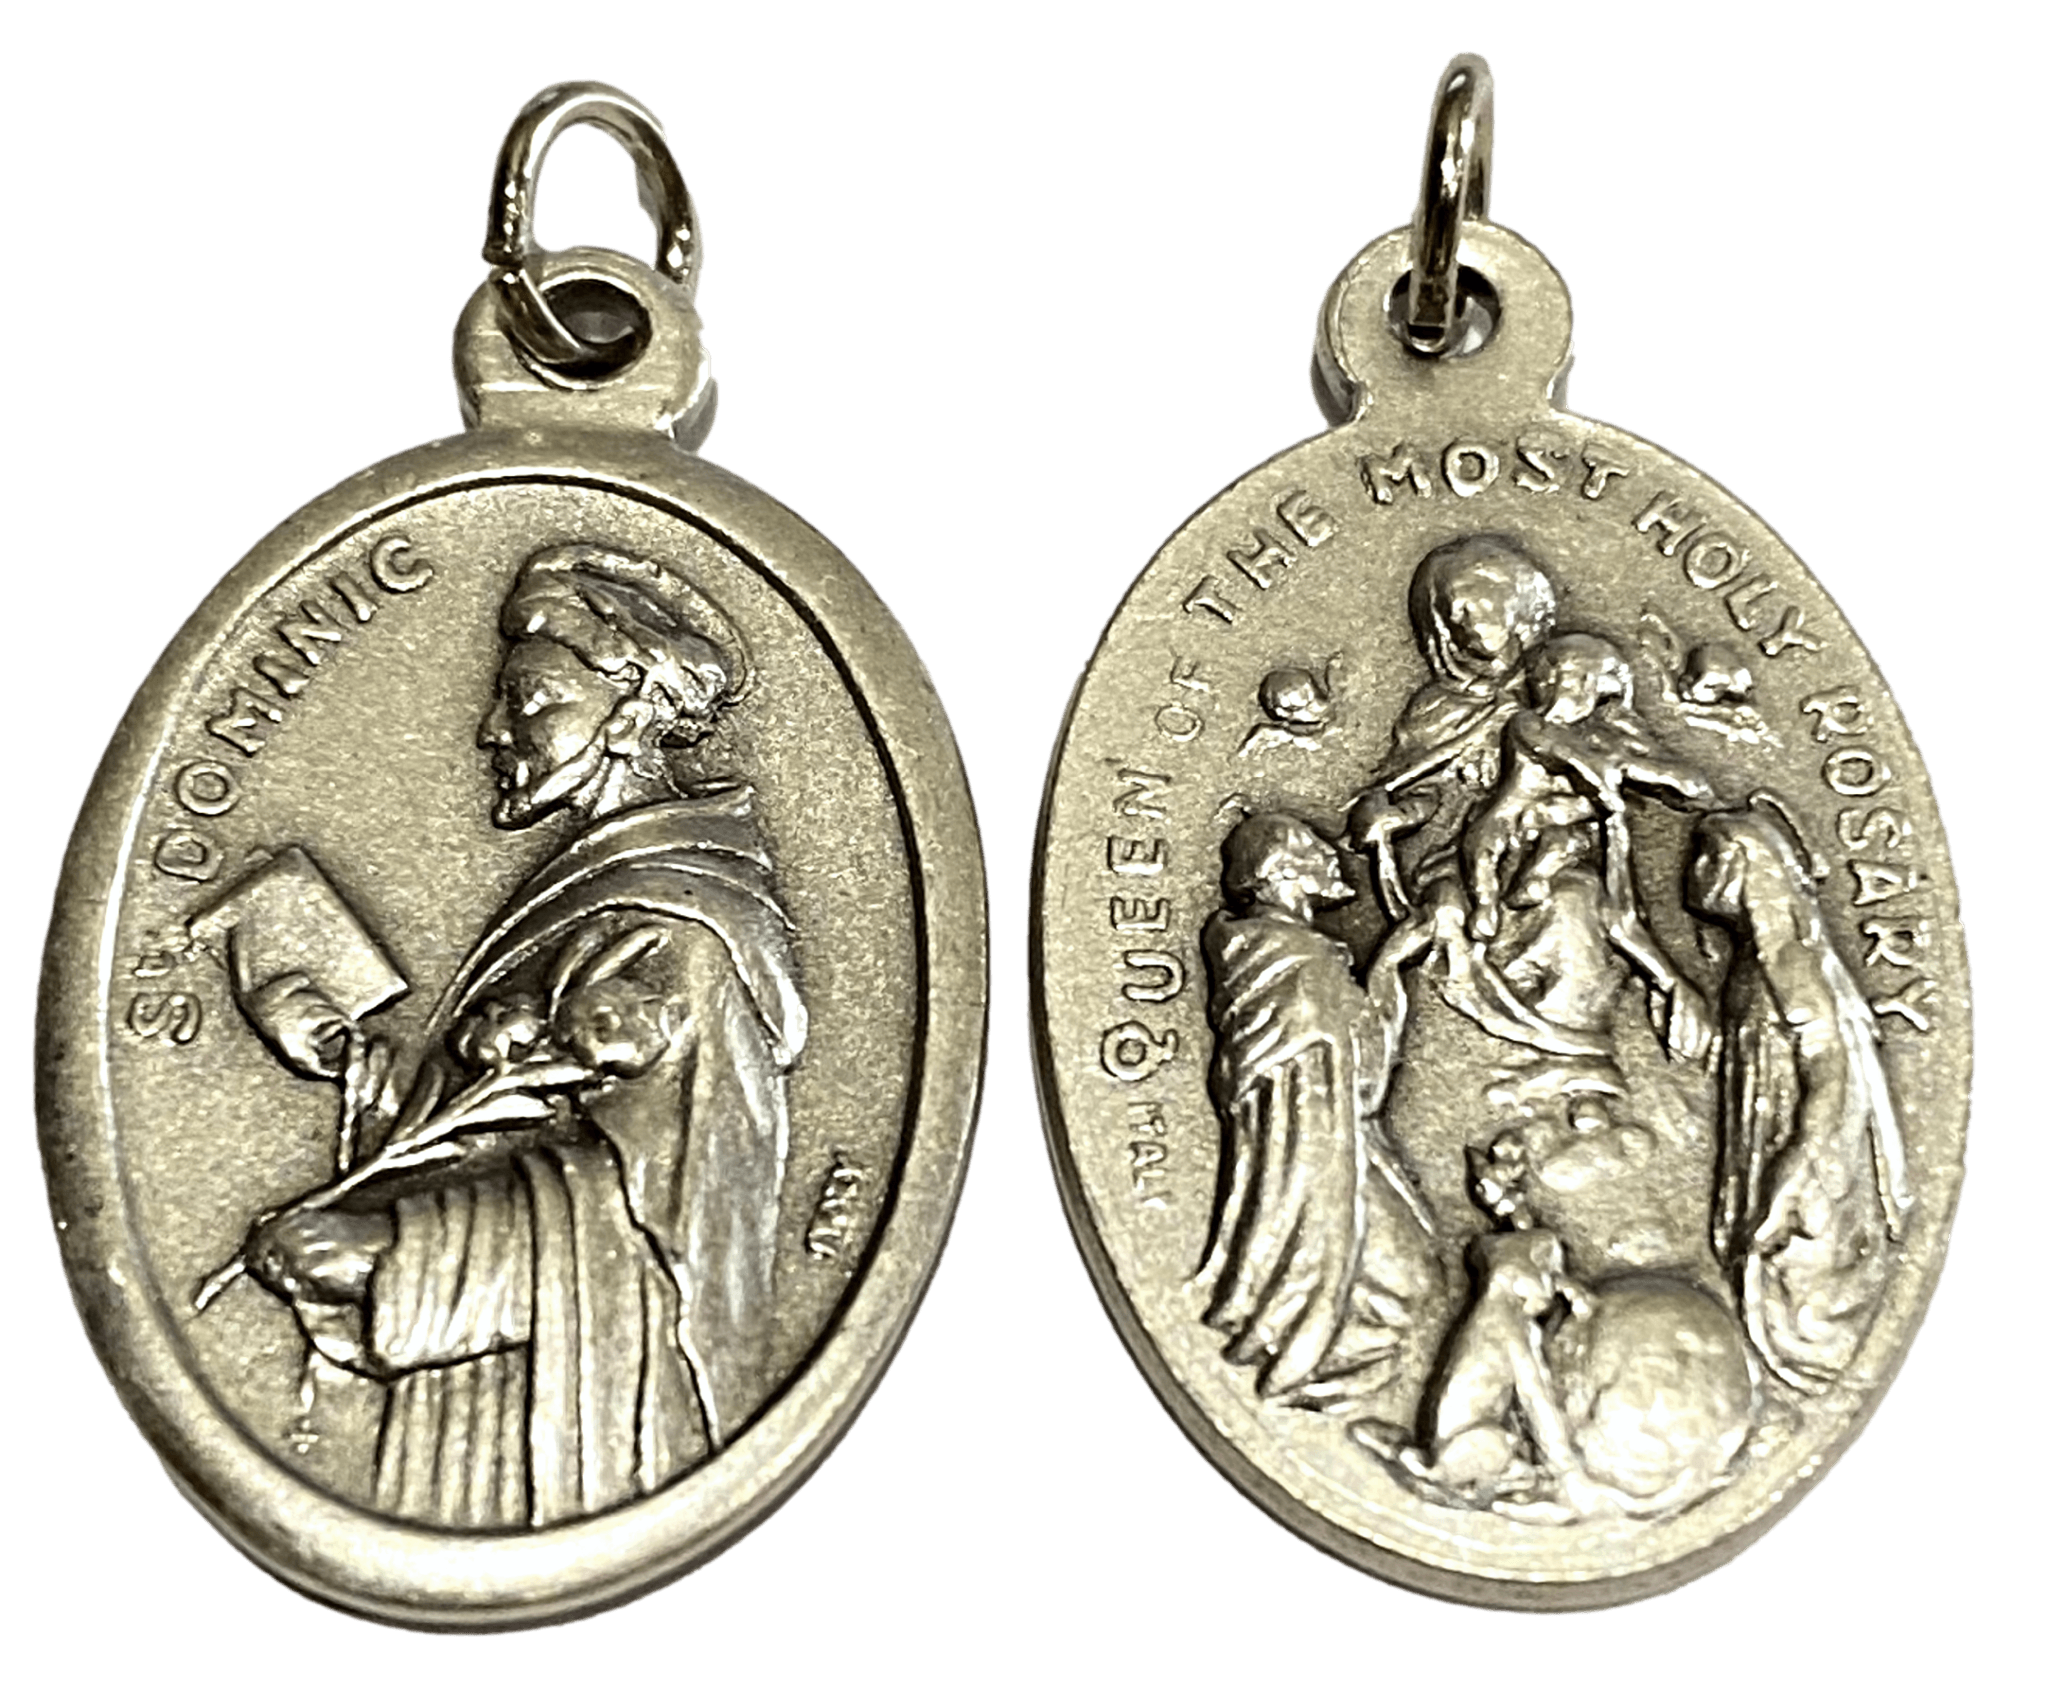 Medal Saint Dominic Queen of the Most Holy Rosary Italian Double-Sided Silver Oxidized Metal Alloy 1 inch - Ysleta Mission Gift Shop- VOTED El Paso's Best Gift Shop